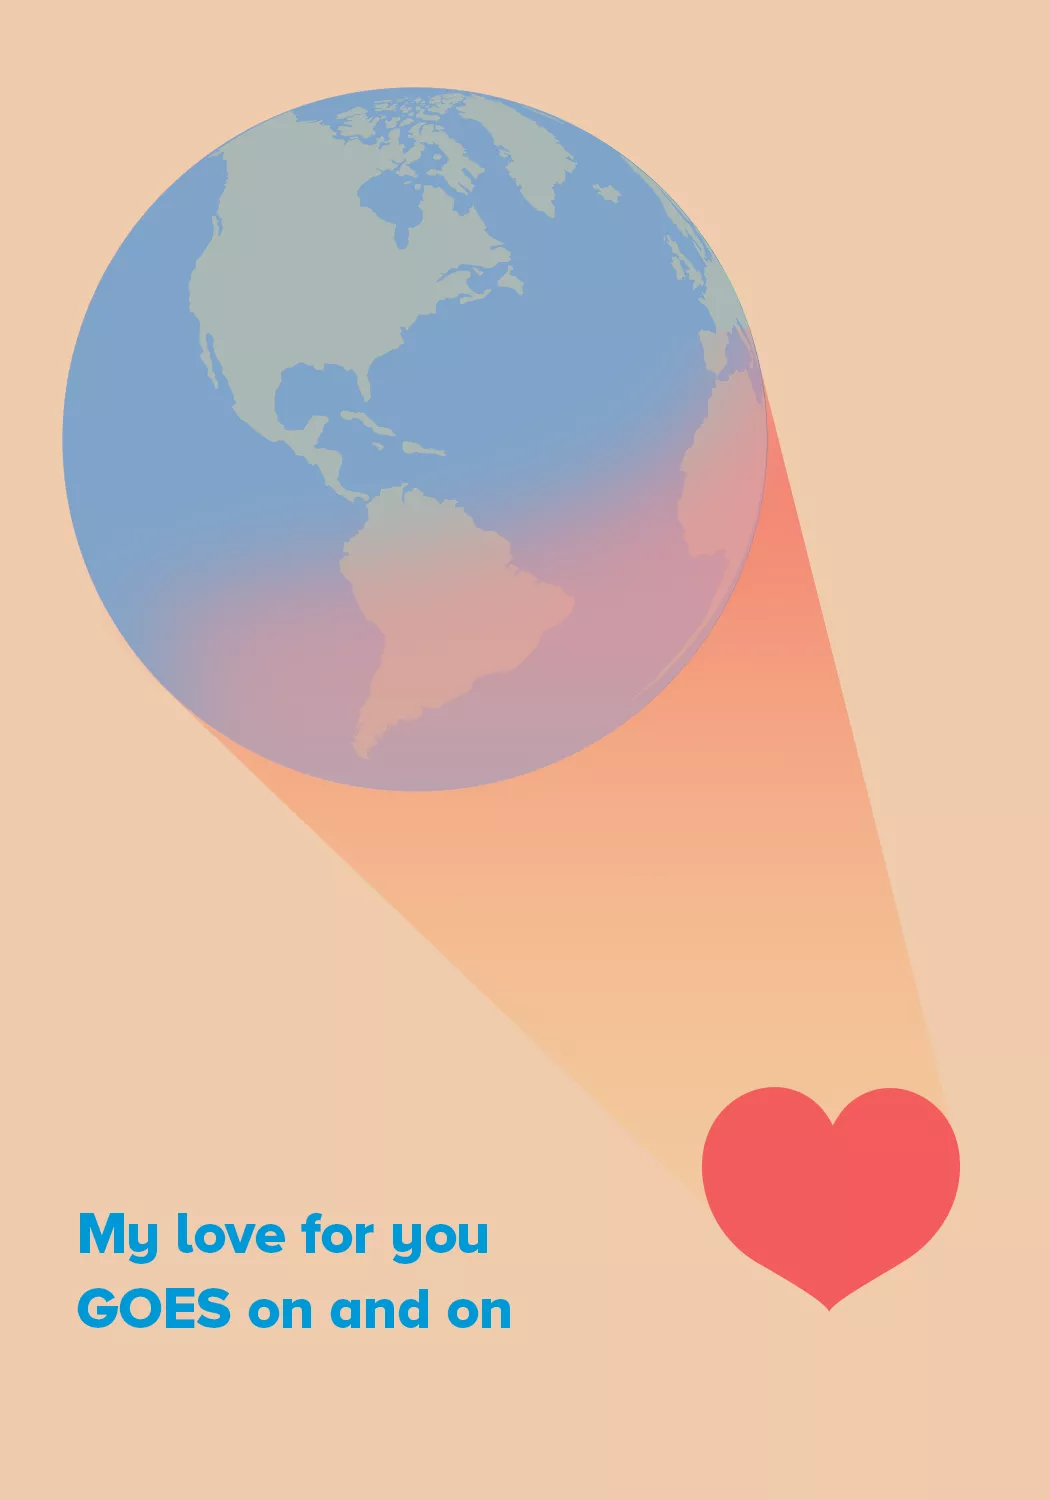 Image of a heart and earth